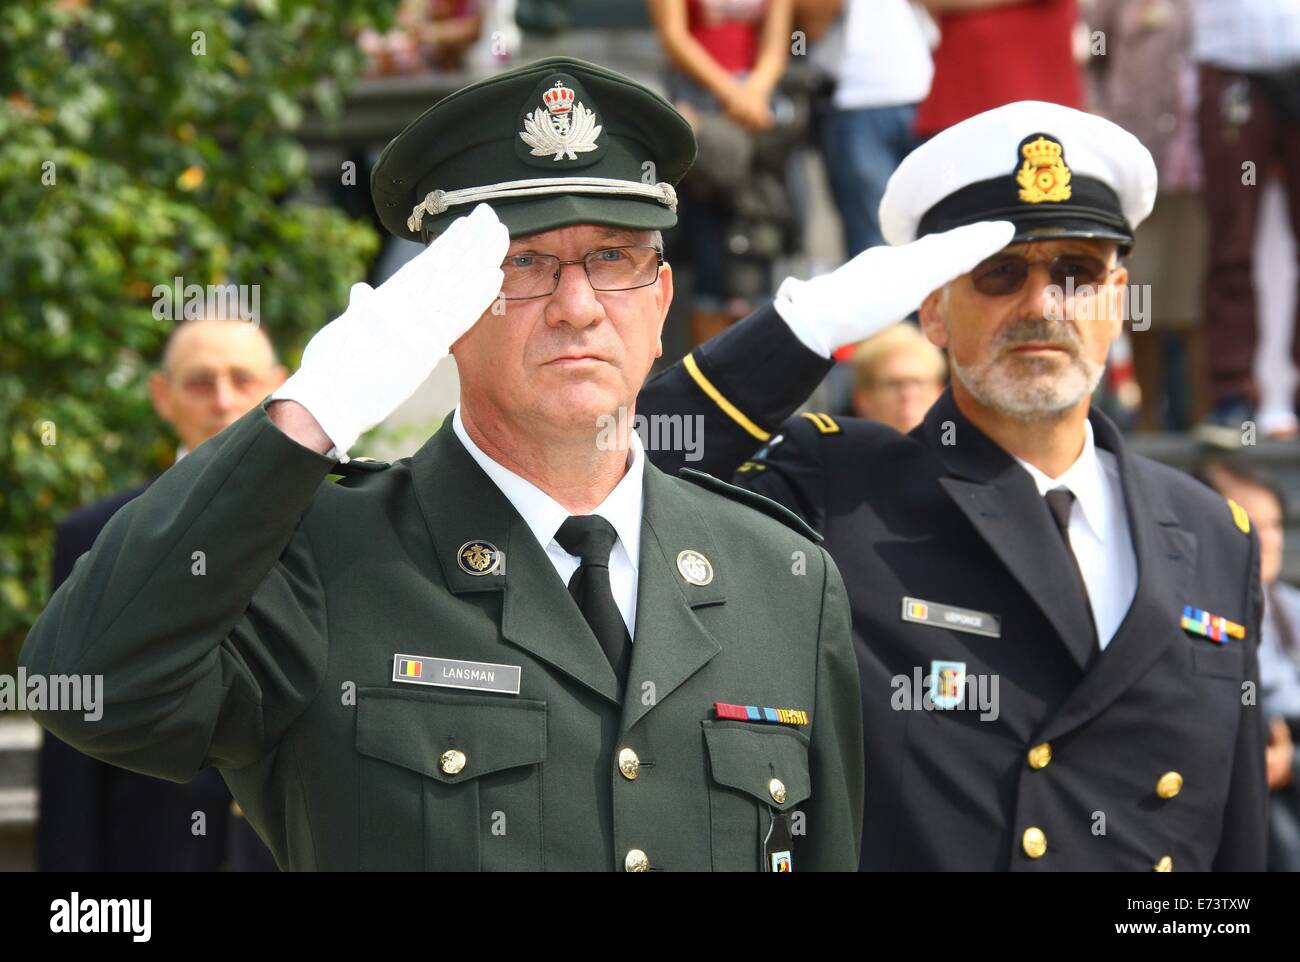 Brussels, Belgium. 5th Sep, 2014. Officers salute to the tomb of the unknown soldiers during a ceremony held to mark the 70th anniversary of the liberation of Brussels in Brussels, Belgium, Sept. 5, 2014. © Gong Bing/Xinhua/Alamy Live News Stock Photo